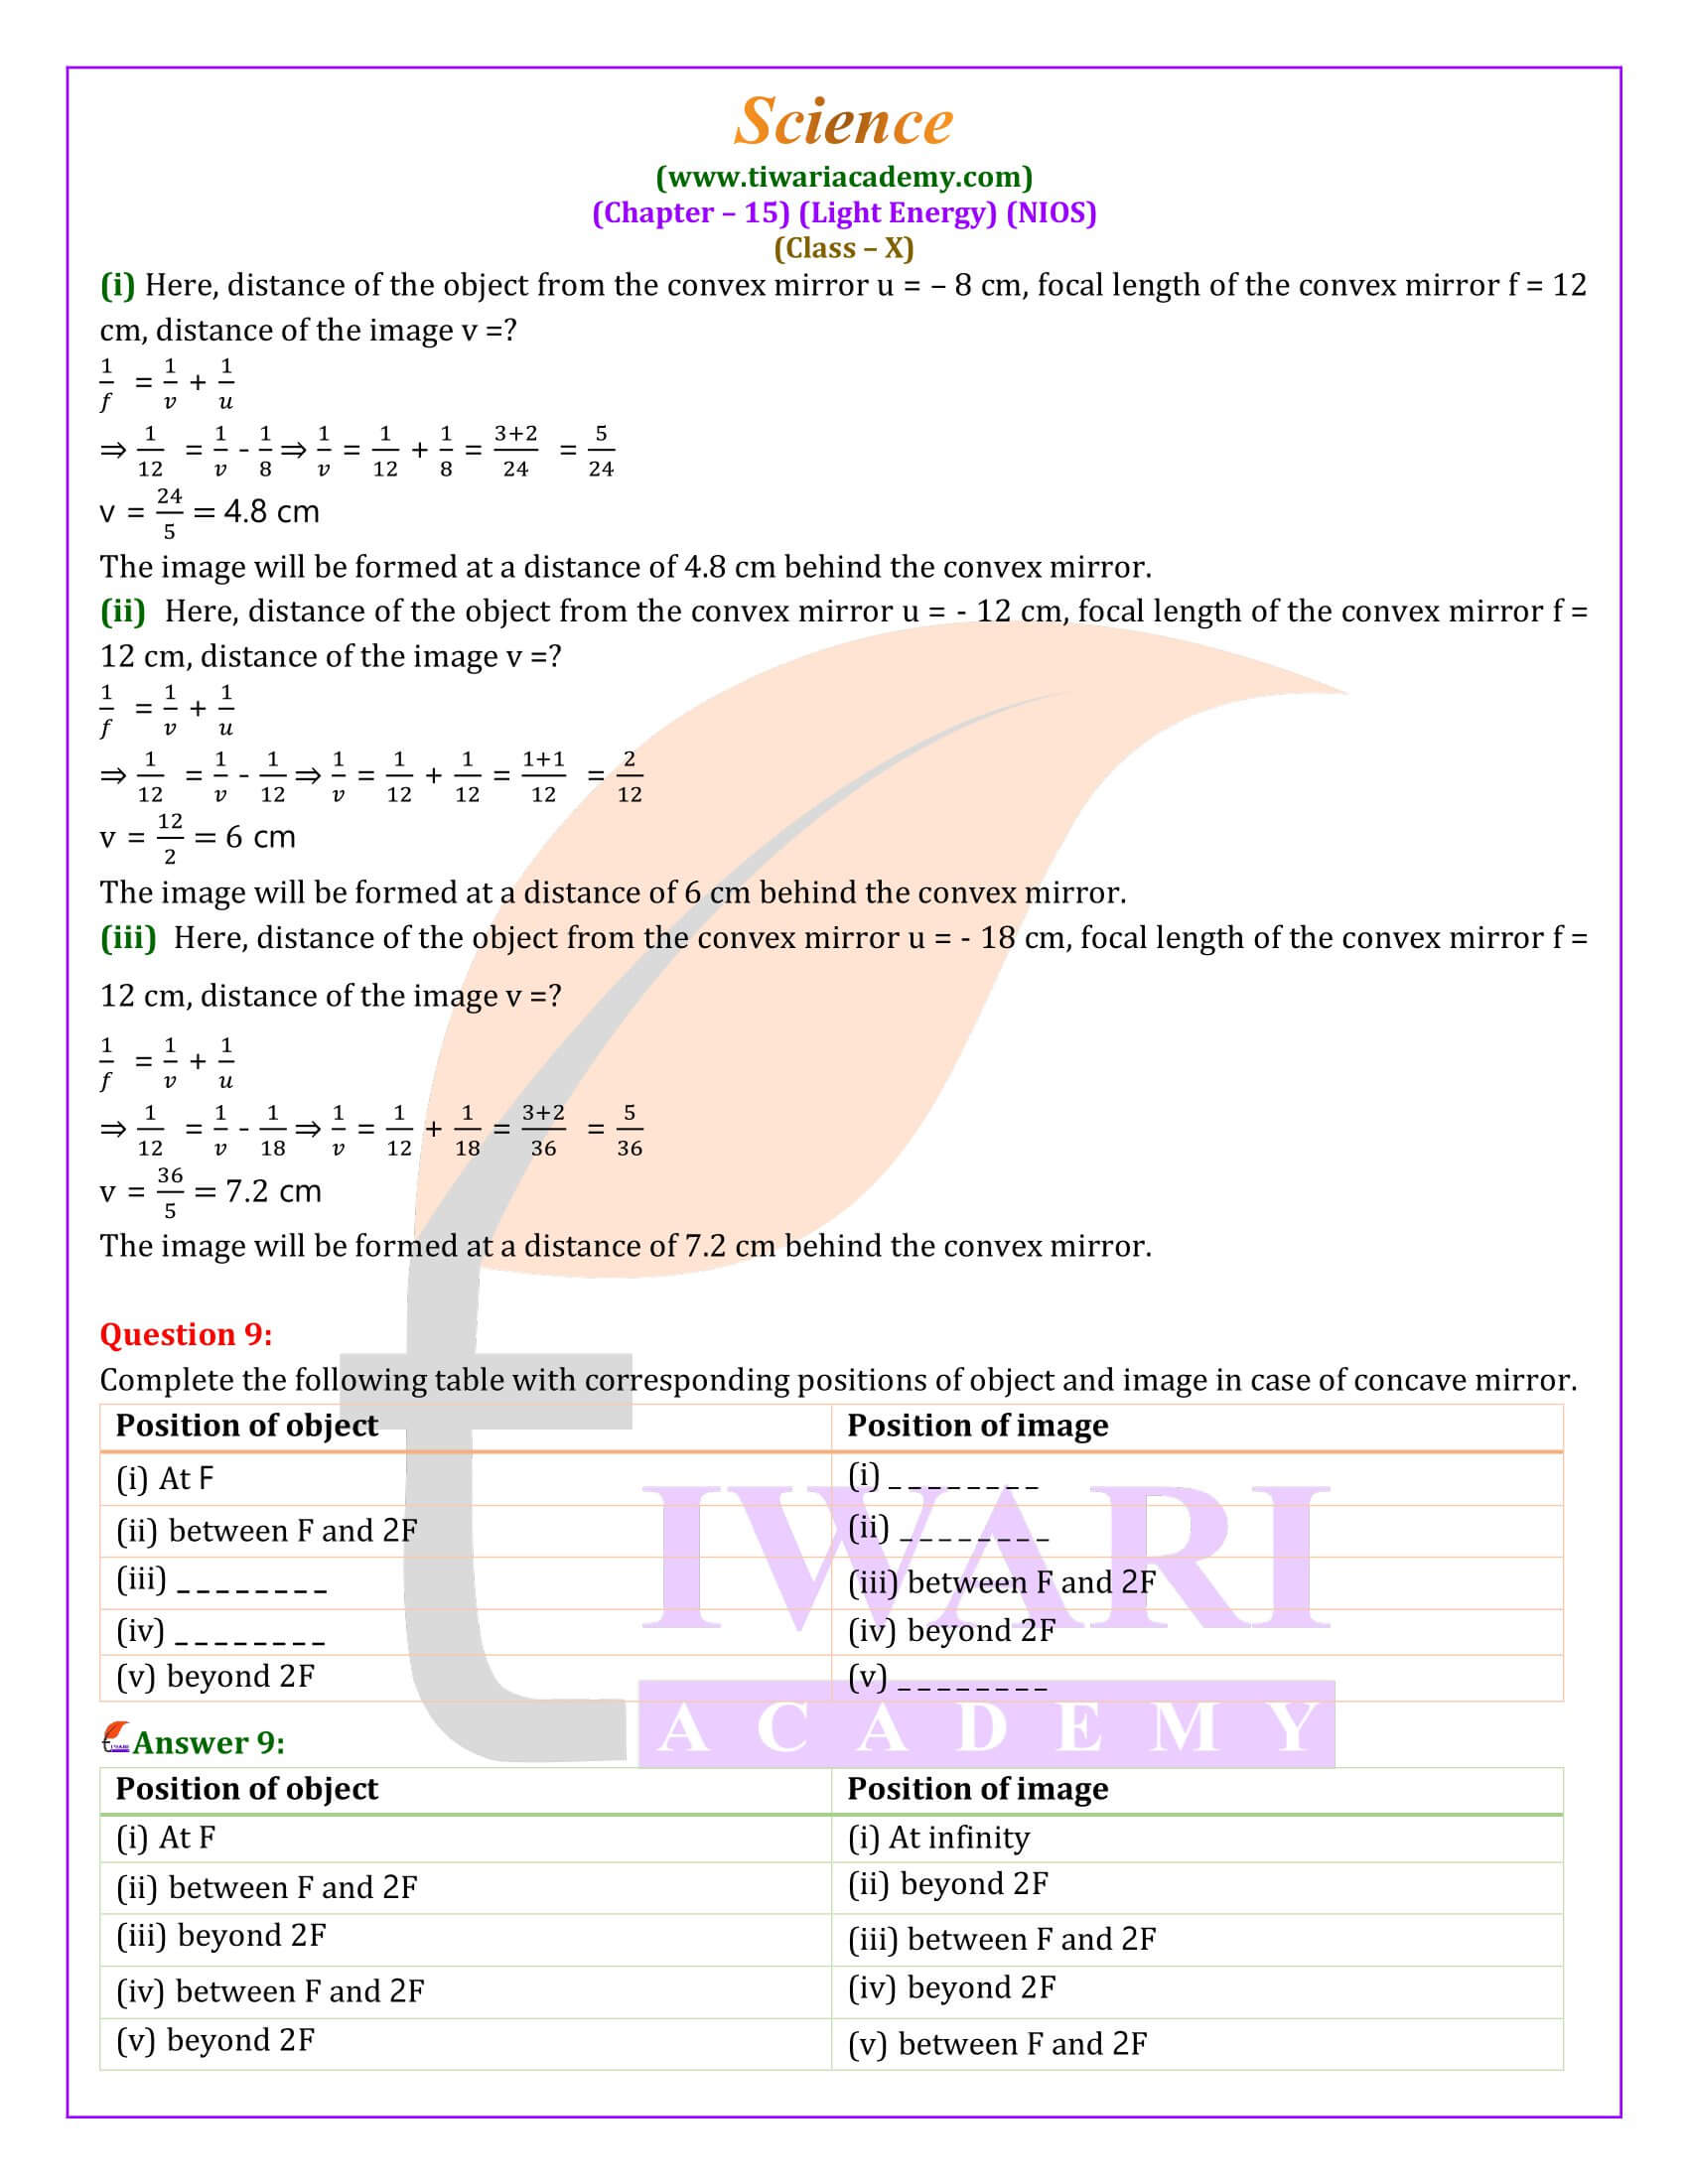 NIOS Class 10 Science Chapter 15 Solutions